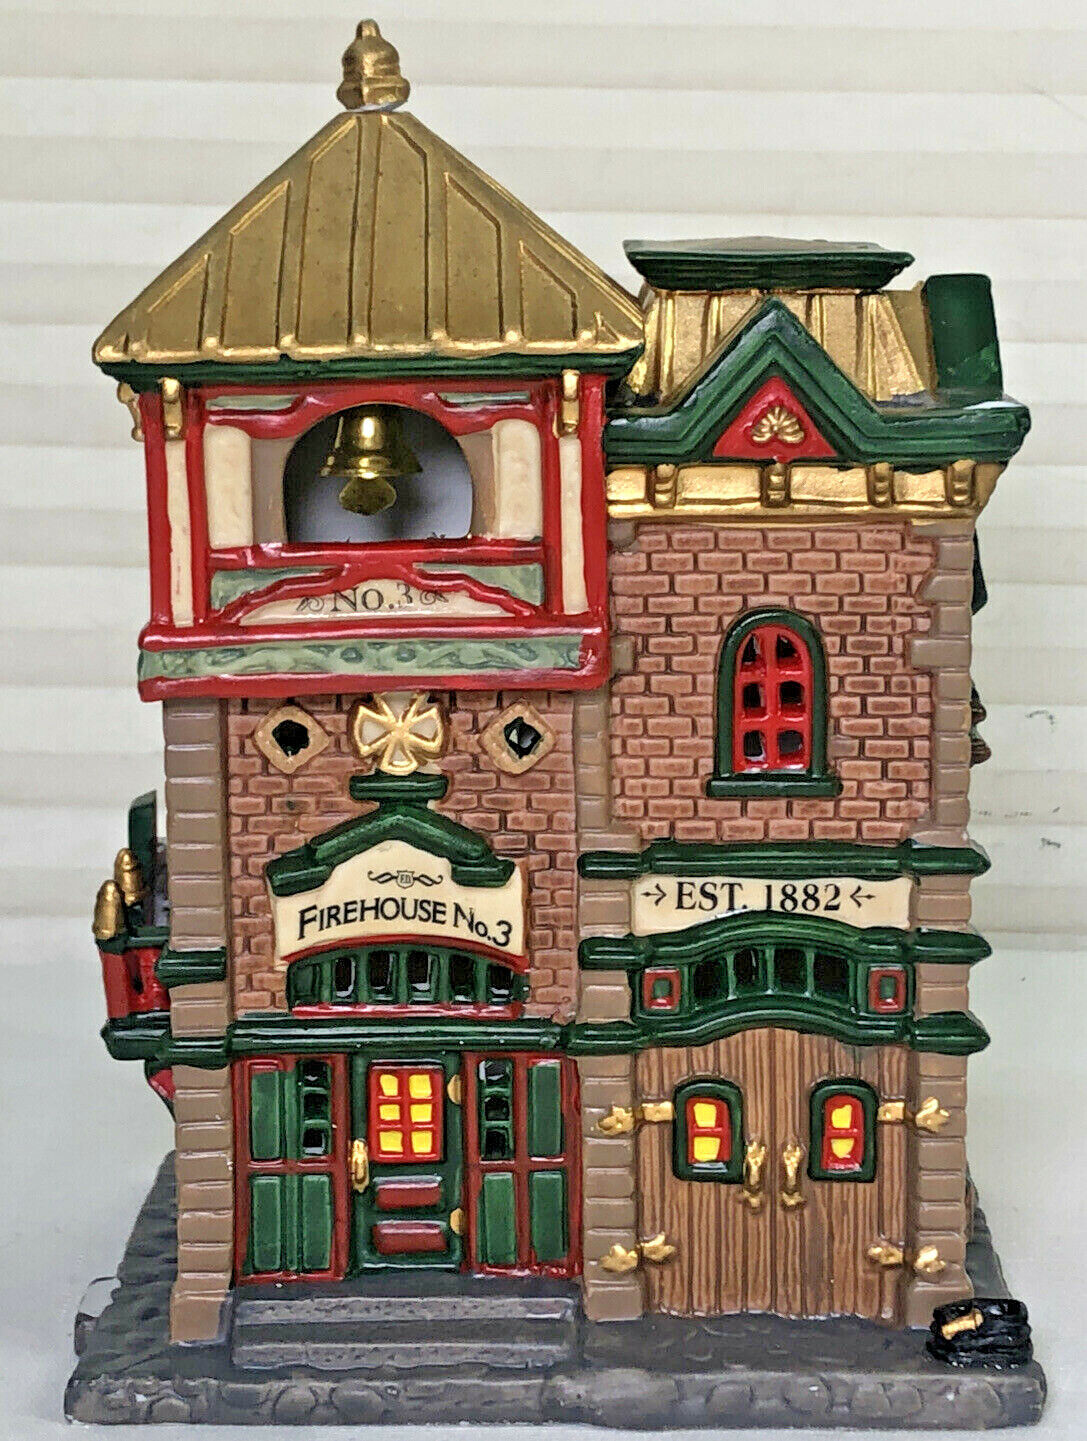 Lemax Christmas Village Firehouse Station Lighted Building No. 3 2005